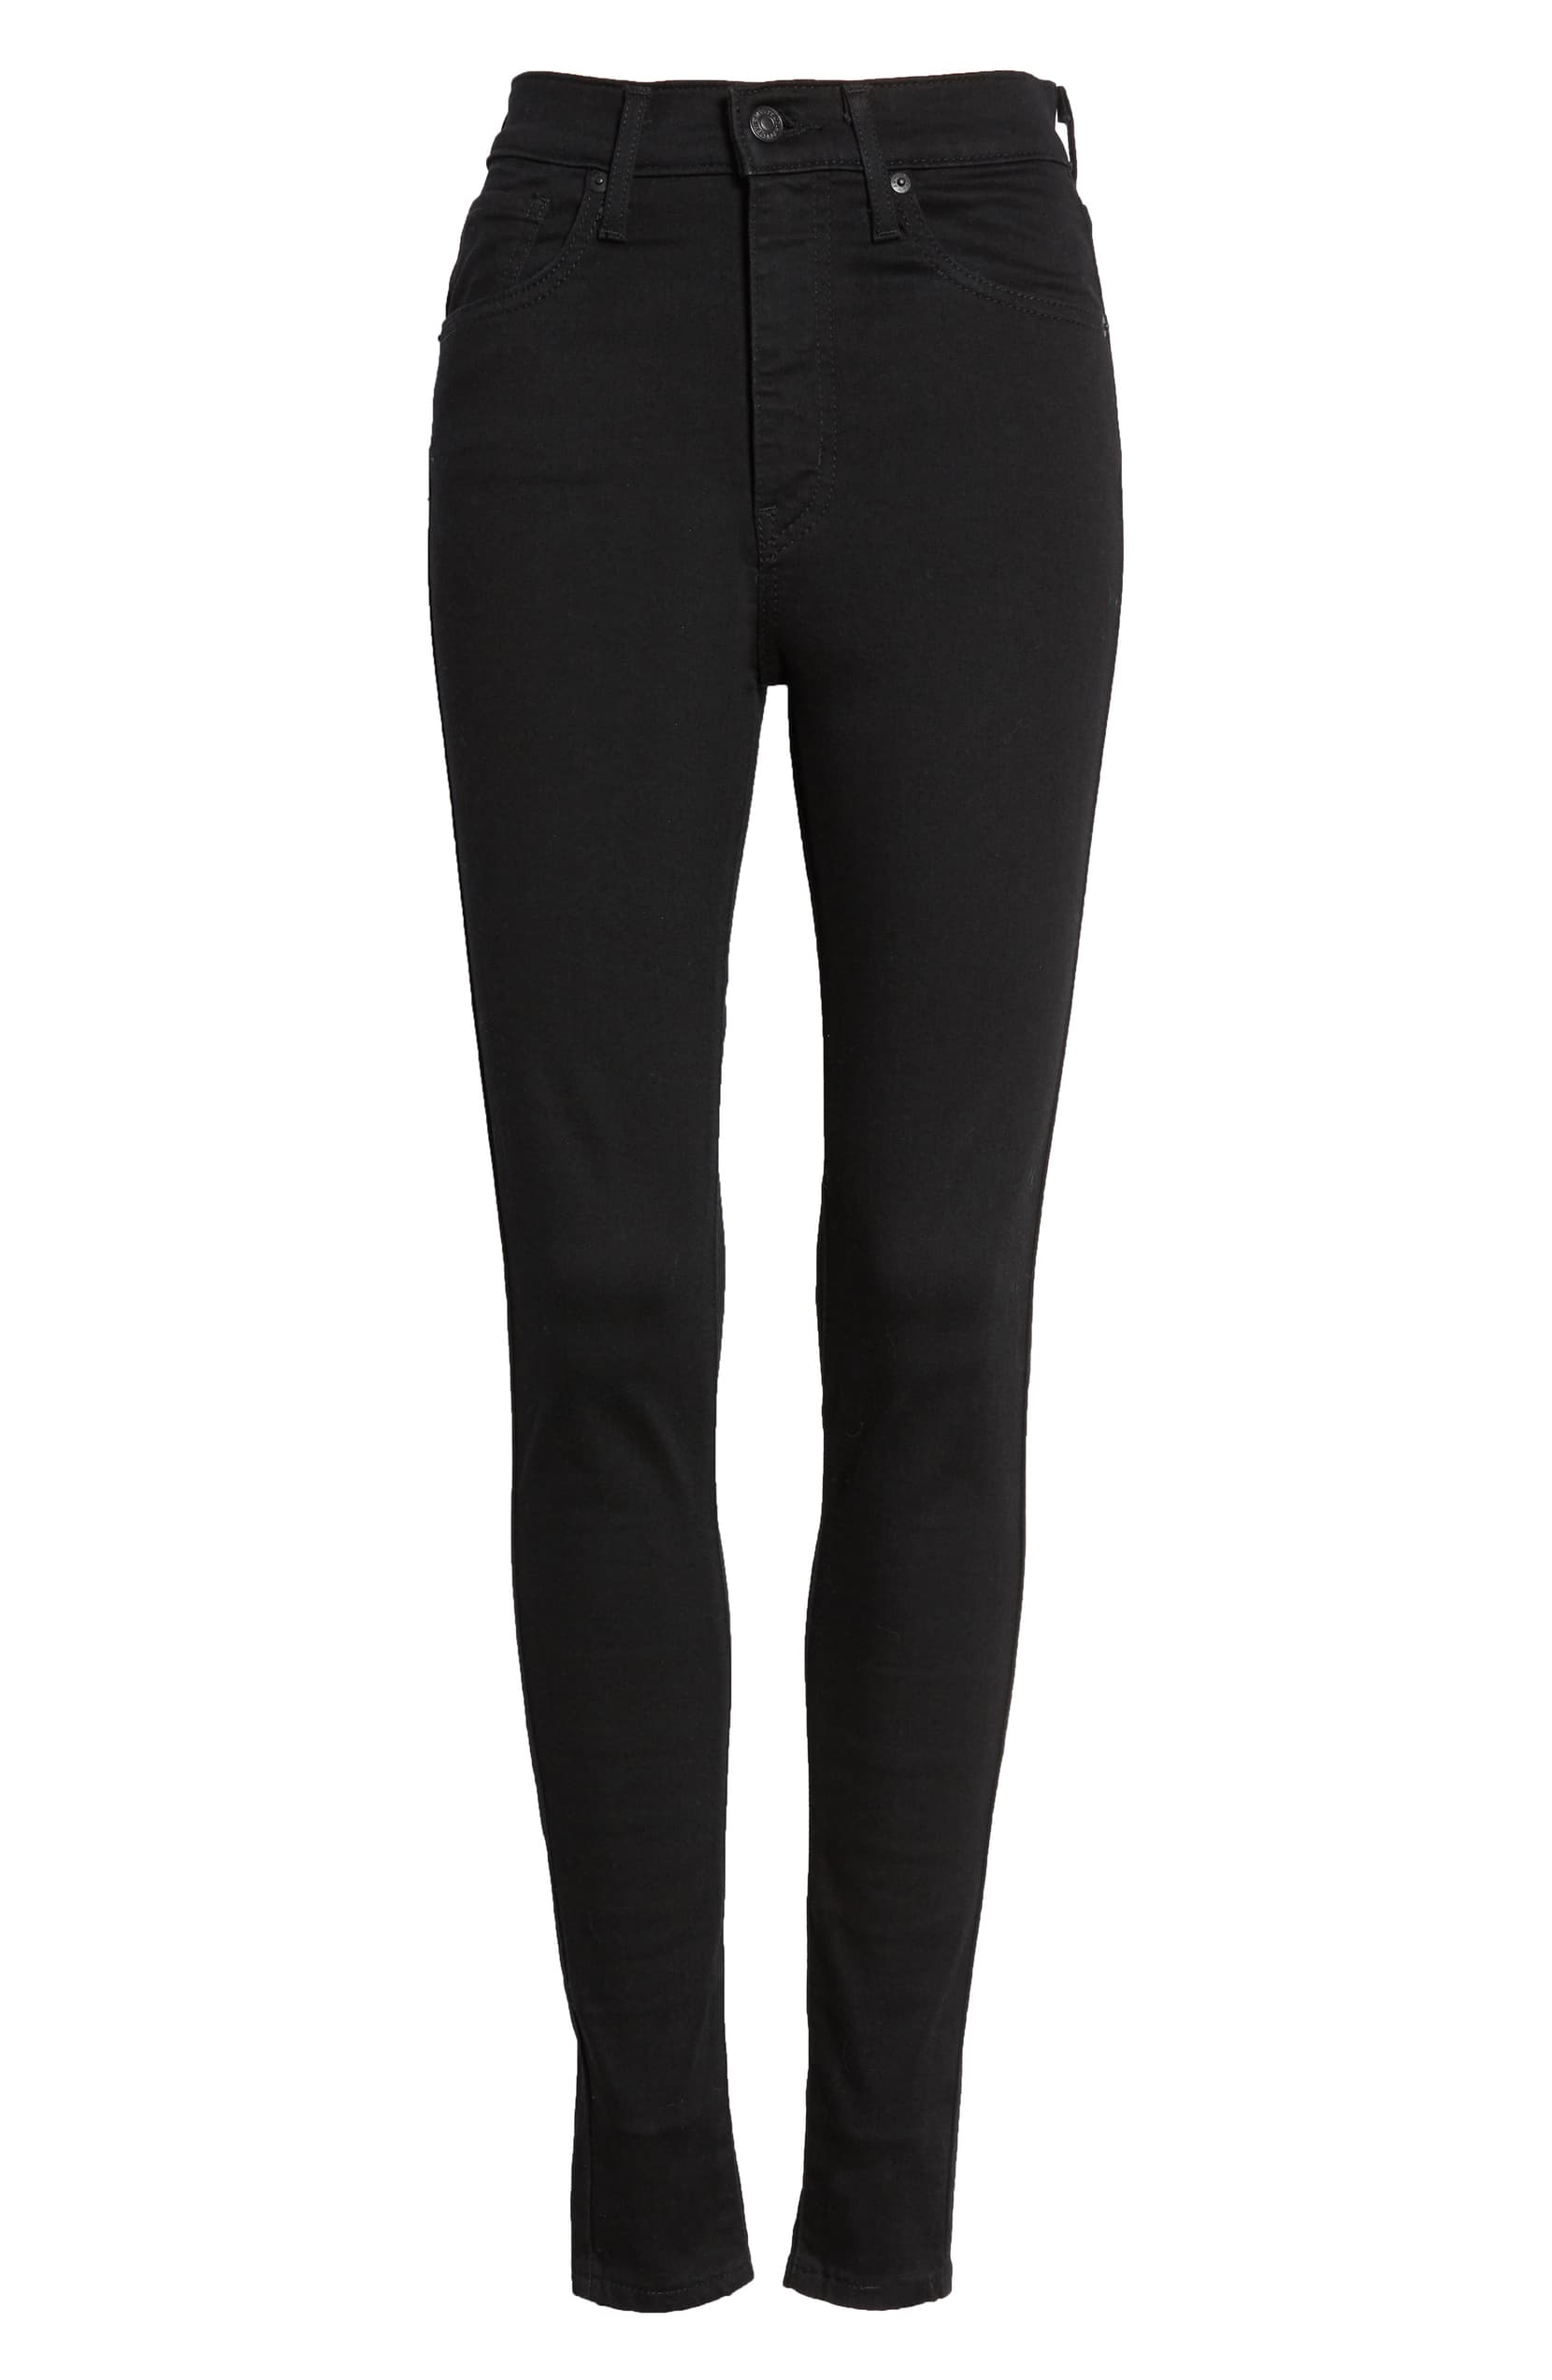 extra high waisted black jeans